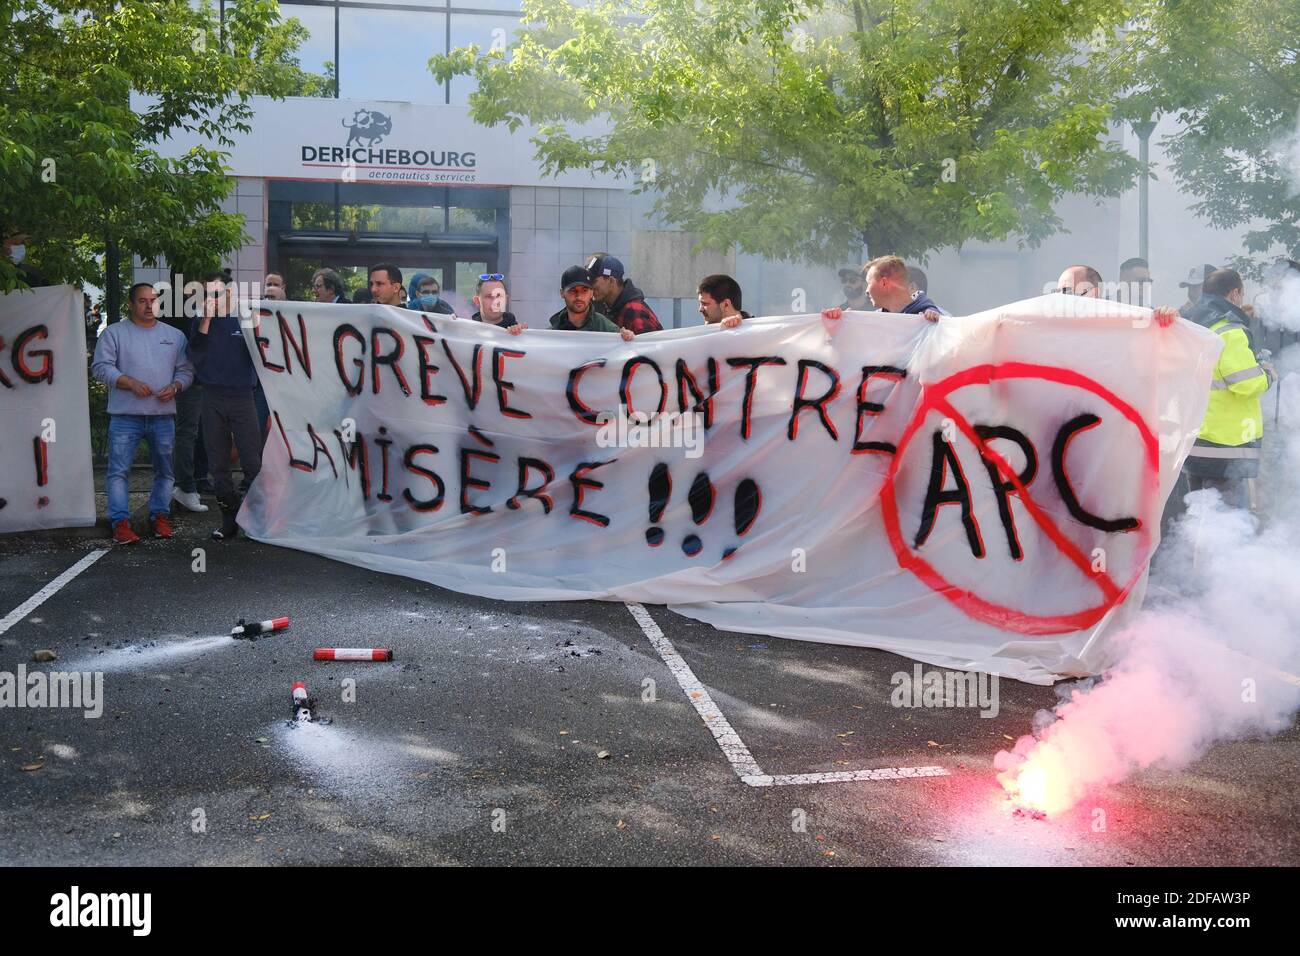 The employees of Derichebourg Aeronautics Services, an Airbus subcontractor, mobilized in front of their company's headquarters, on June 12, 2020, in Toulouse - Blagnac (France). They expressed their dissatisfaction against a social plan validated by the majority union FO (Force Ouvrière). This plan, developed because of the crisis in the aeronautical industry, plans to cut wages and suspend benefits. Without signing these measures, management threatened to lay off up to half of the 1,600 employees in September. Photo by Patrick Batard/ABACAPRESS.COM Stock Photo